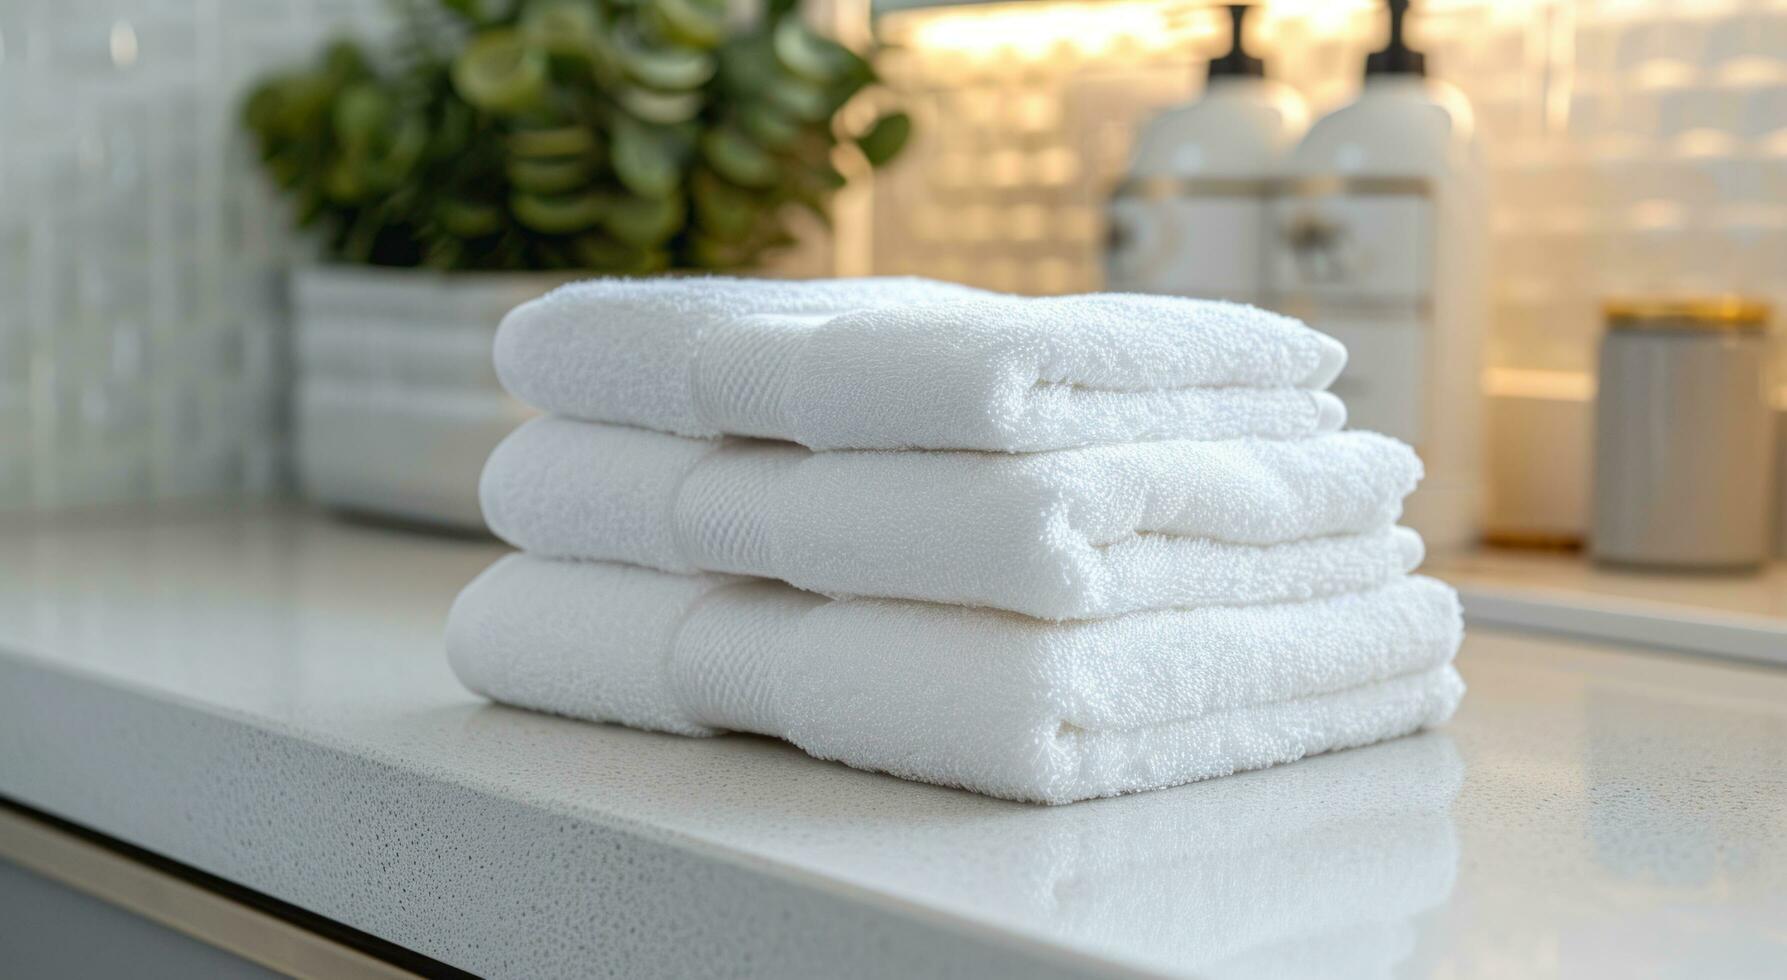 AI generated a stack of white towels on the counter photo